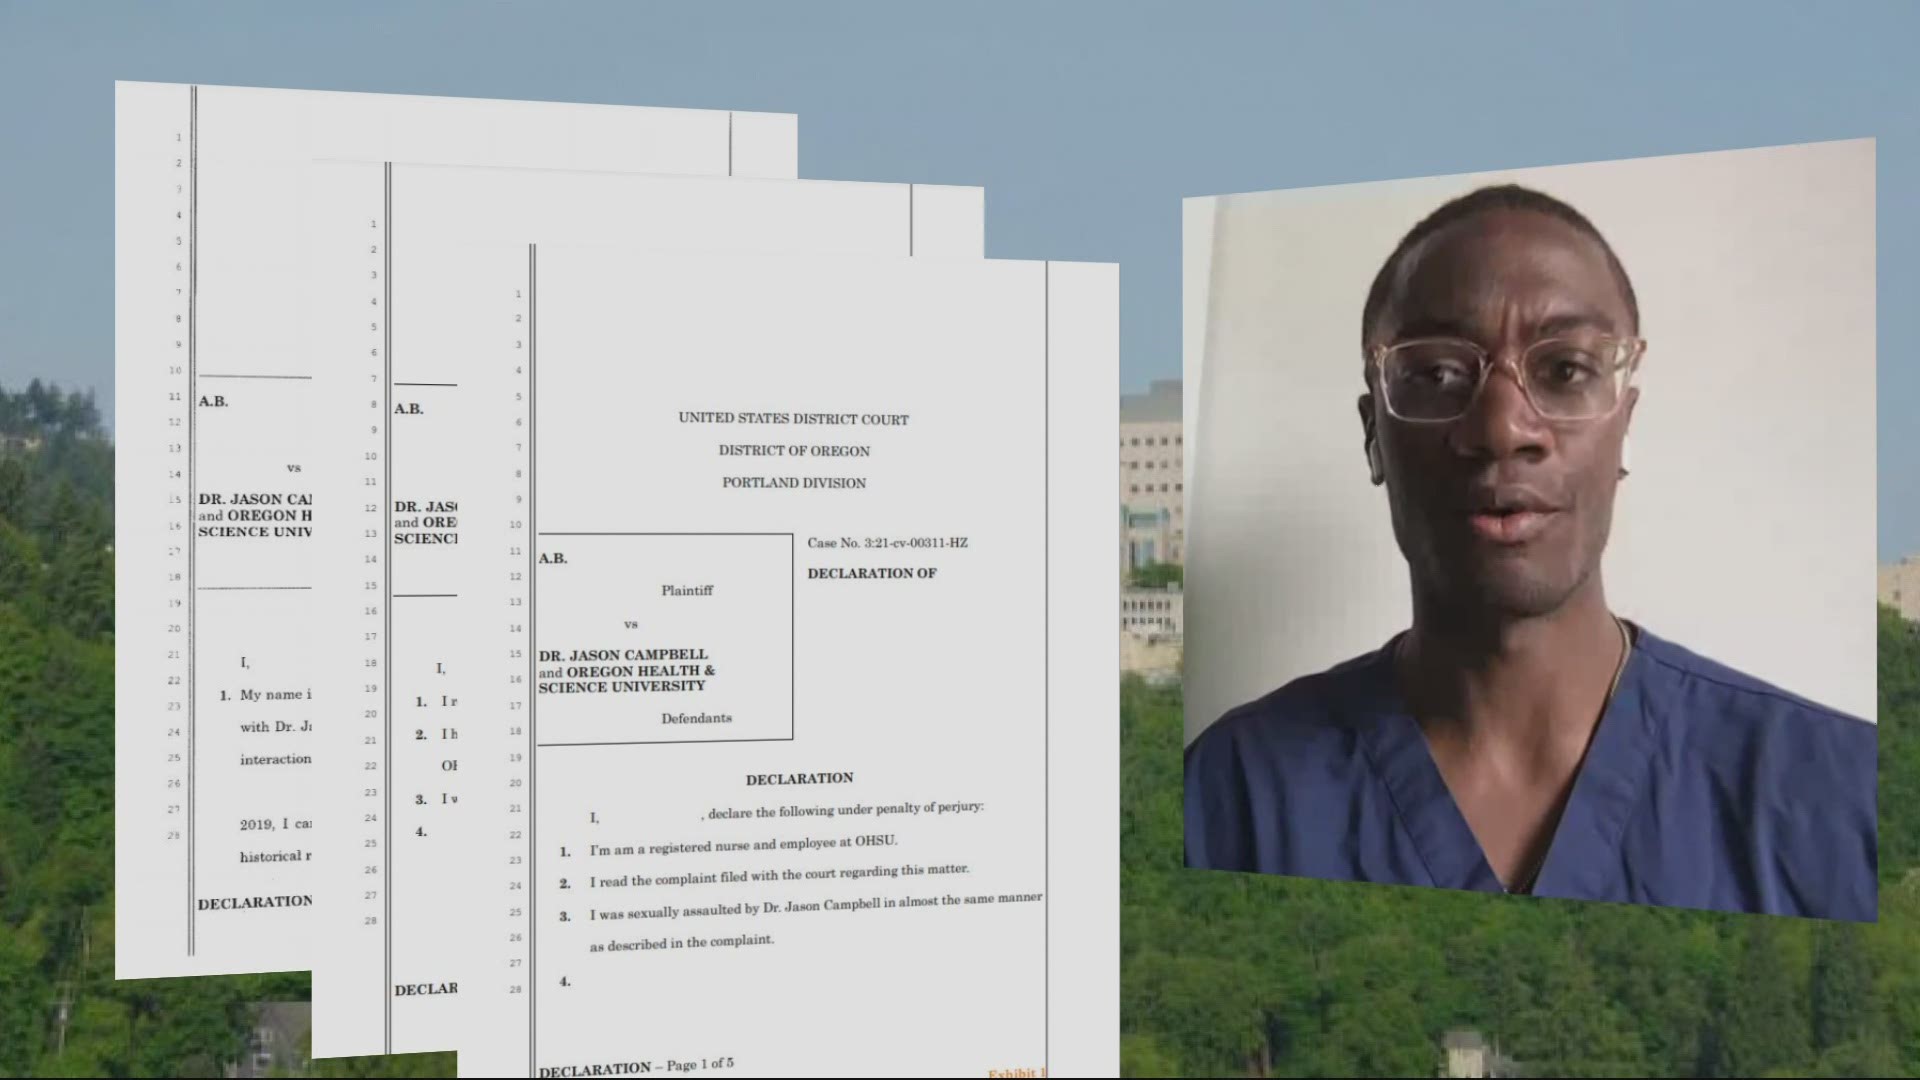 There are new details in the lawsuit against Dr. Jason Campbell and OHSU. More women are accusing him of sexual assault. Devon Haskins reports.